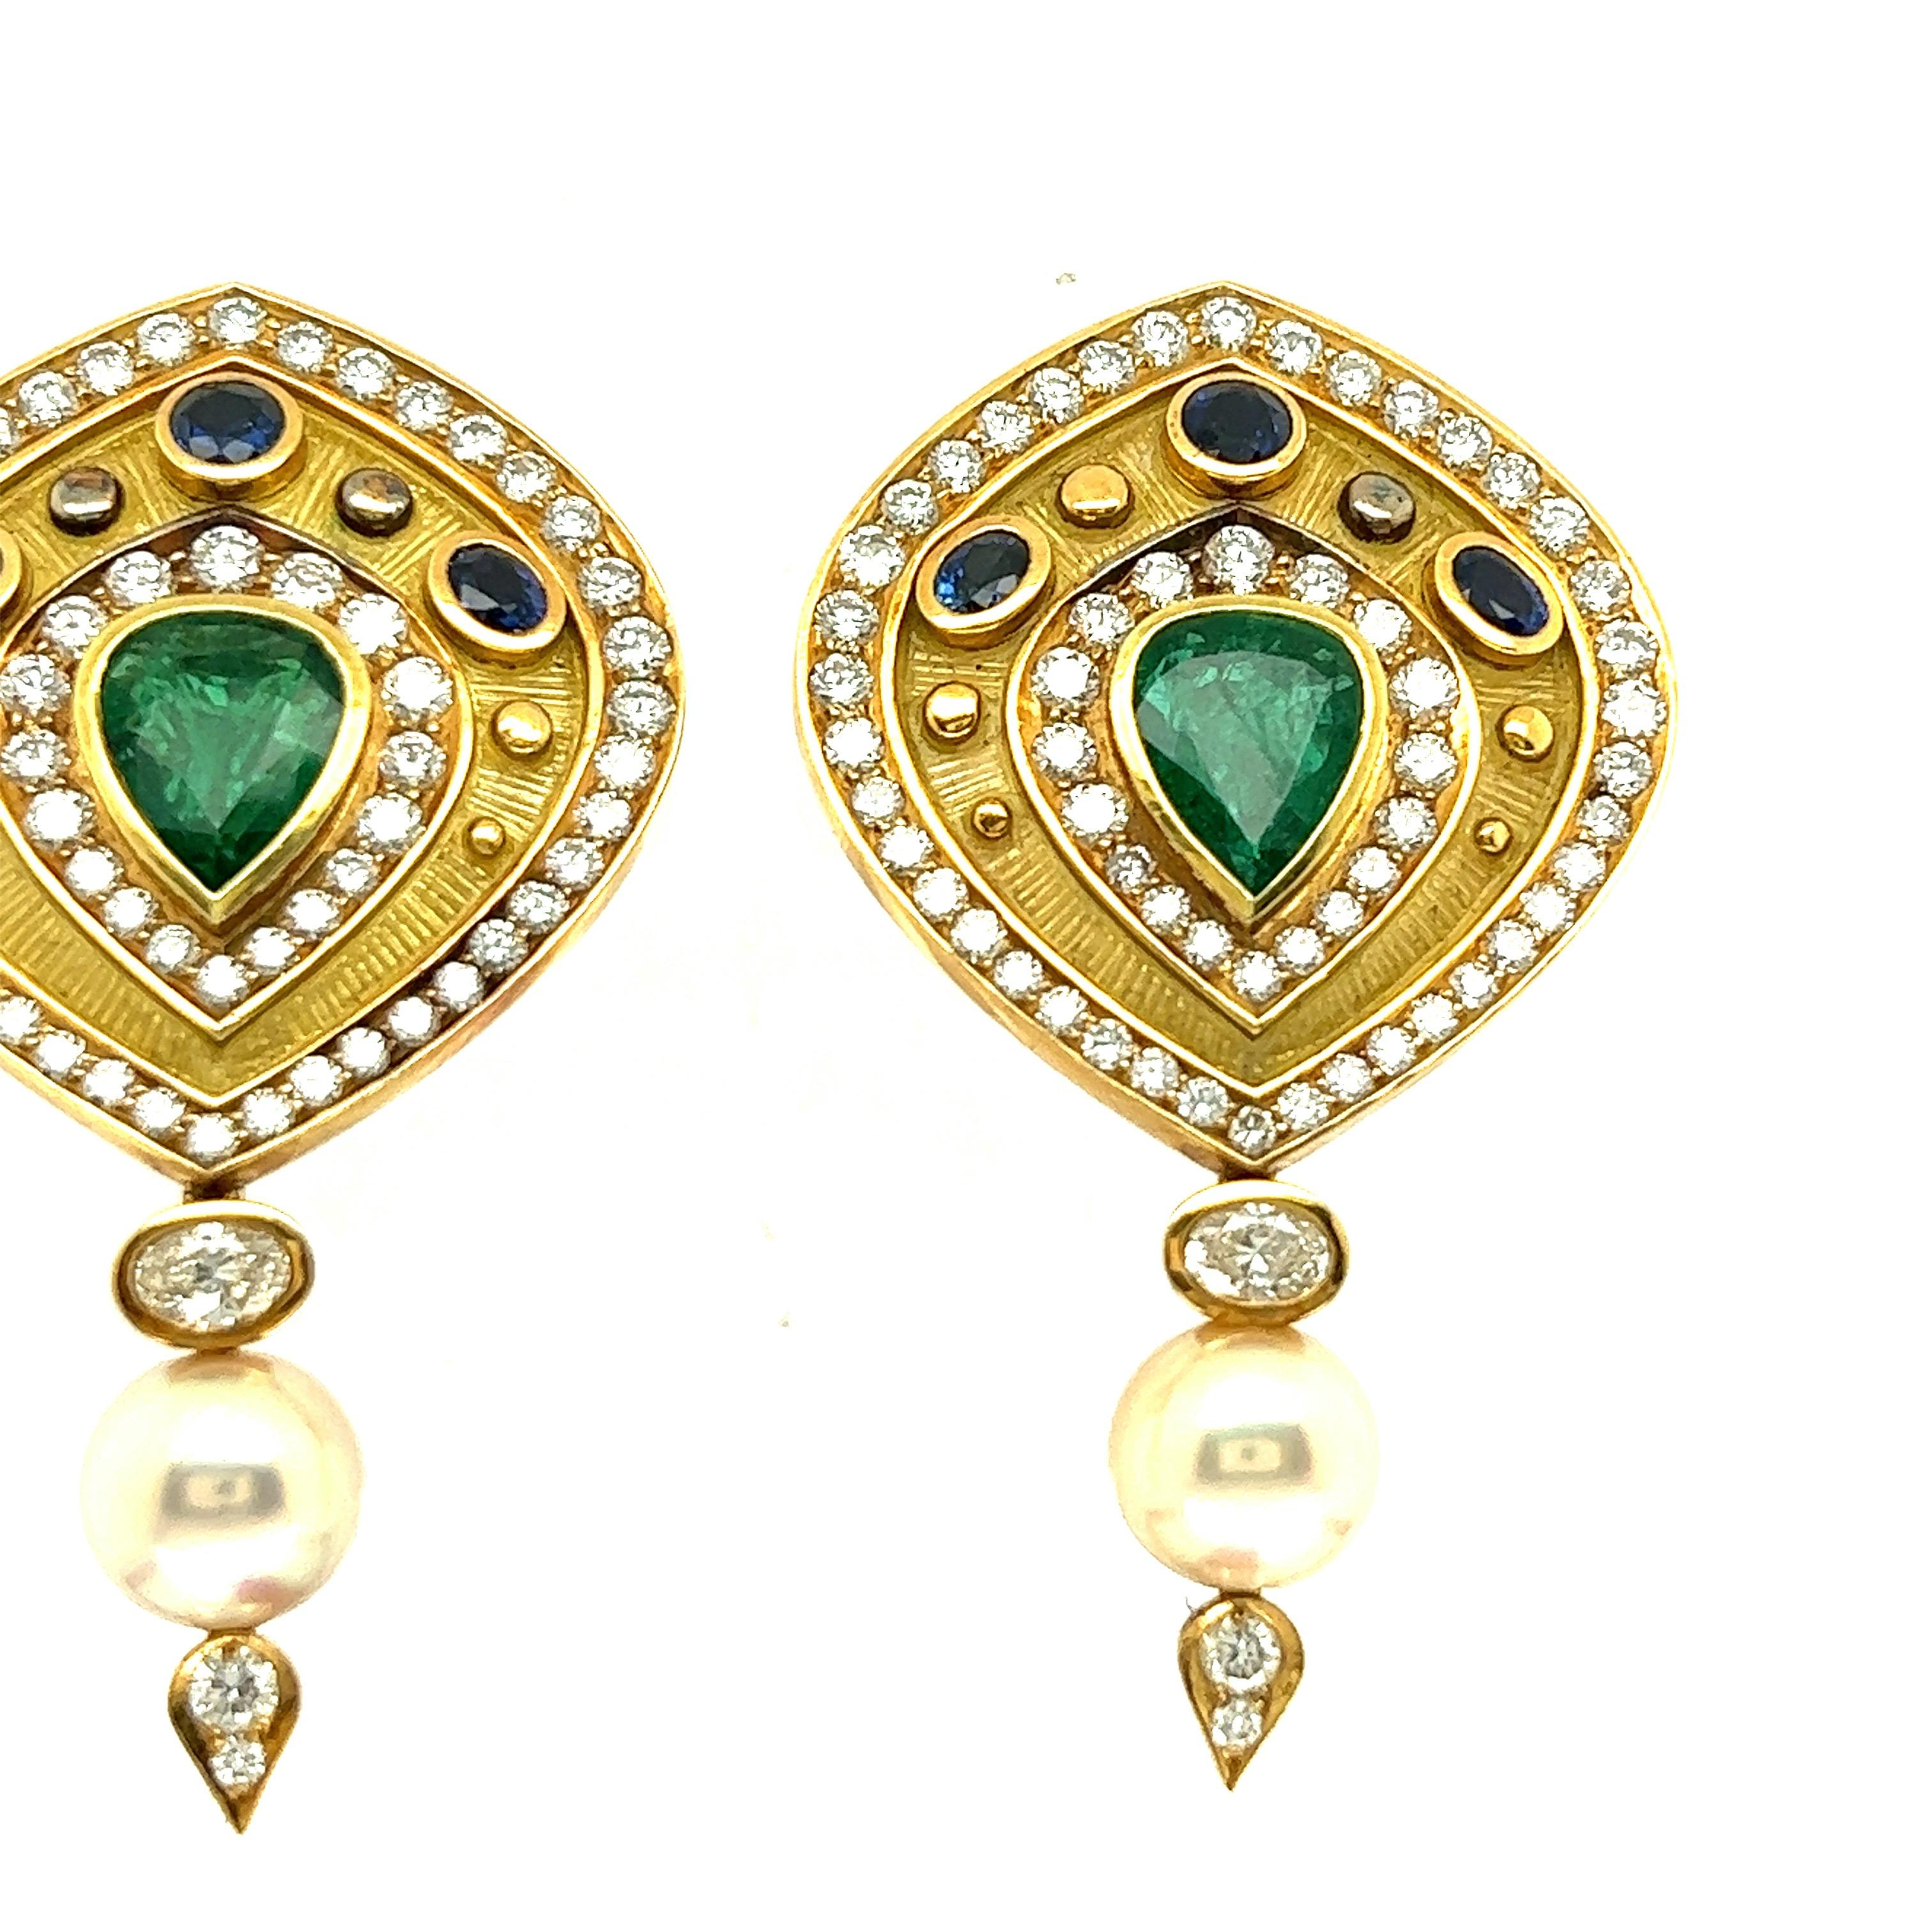 Pear Shaped Emerald, Diamond, and Sapphire 18k Yellow Gold Earrings For Sale 2